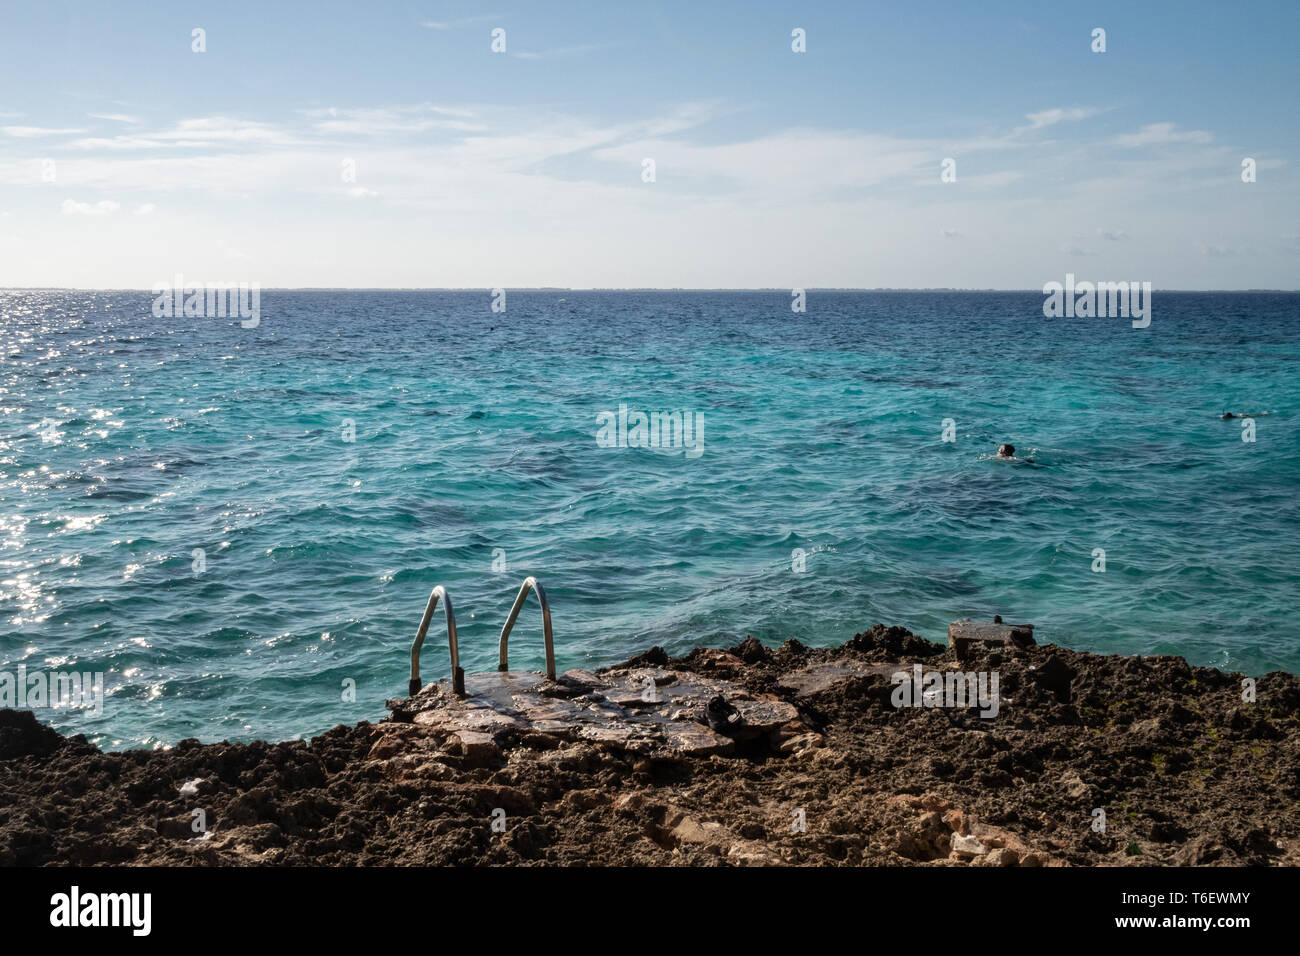 Snorkellers in the sea, Bay of Pigs, Cuba Stock Photo